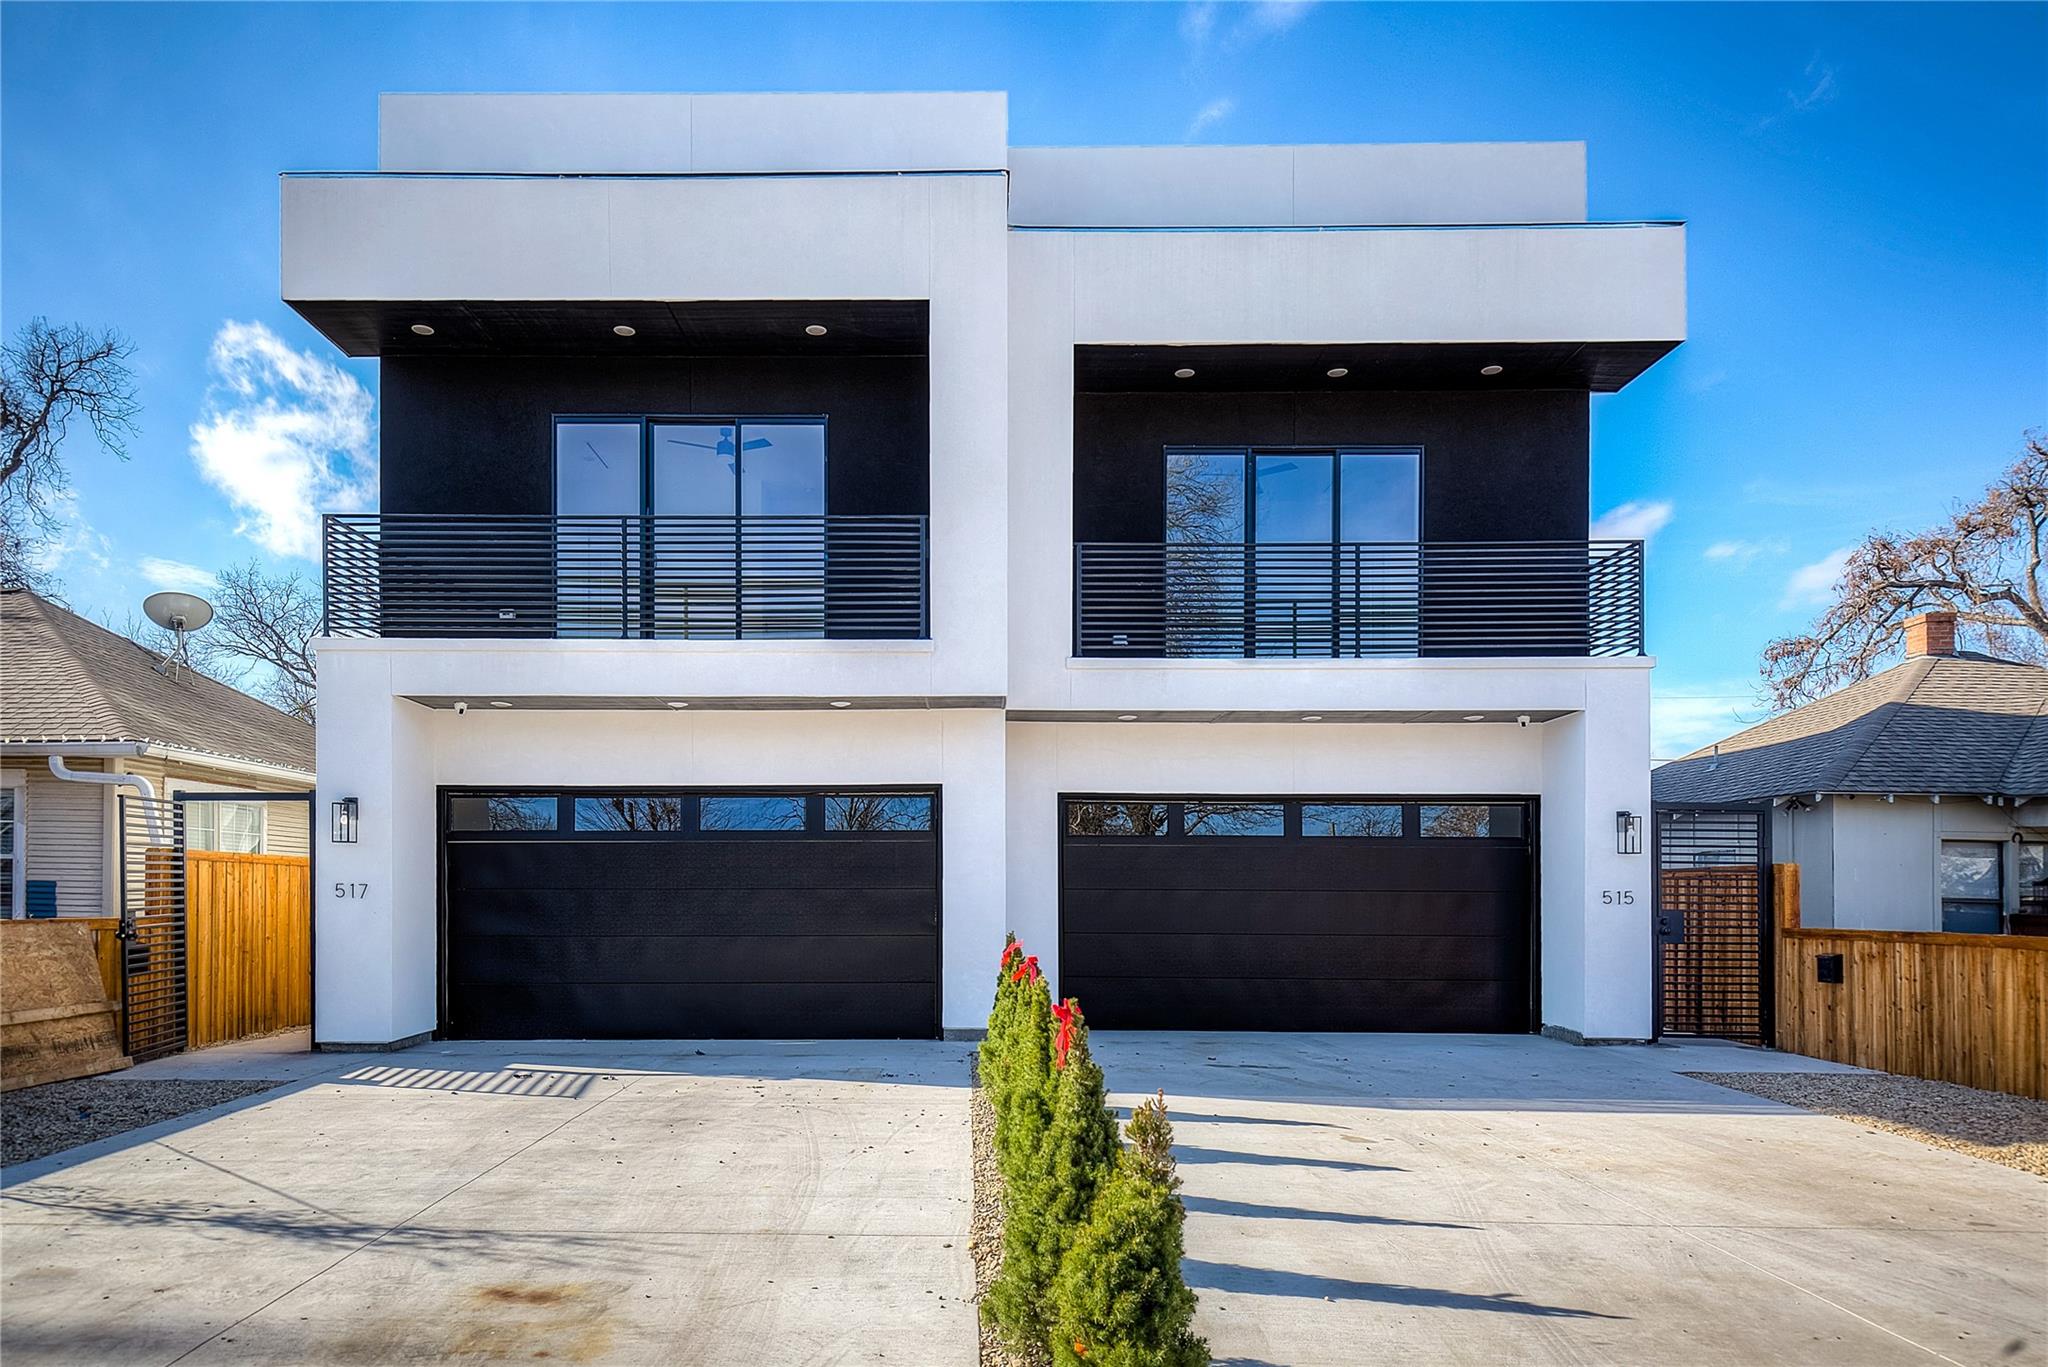 A large white two story house with black garage doors.